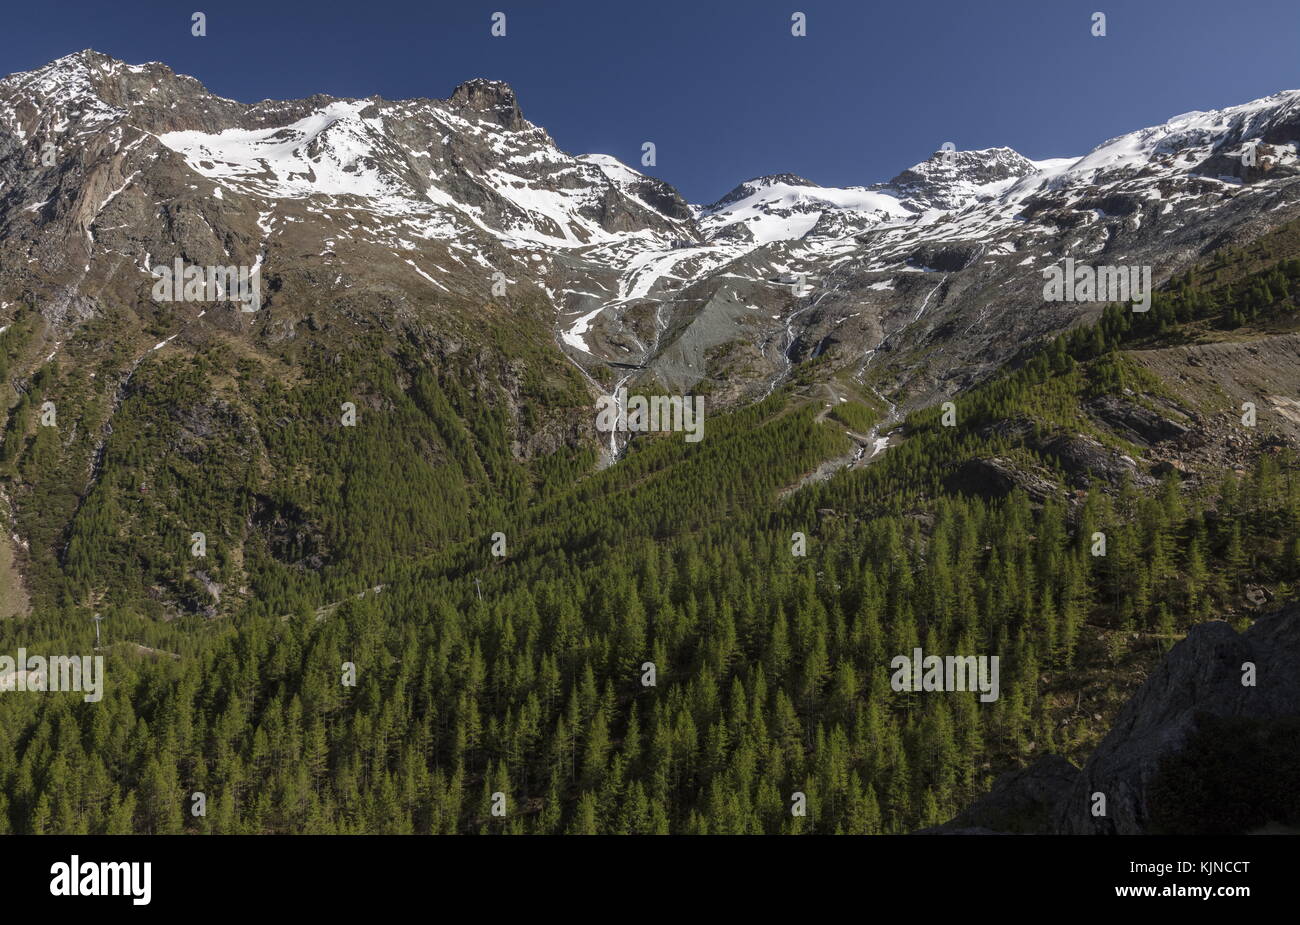 Larch Woodland on the slopes of Plattenhorn, above Saas Fee, Swiss Alps. Stock Photo